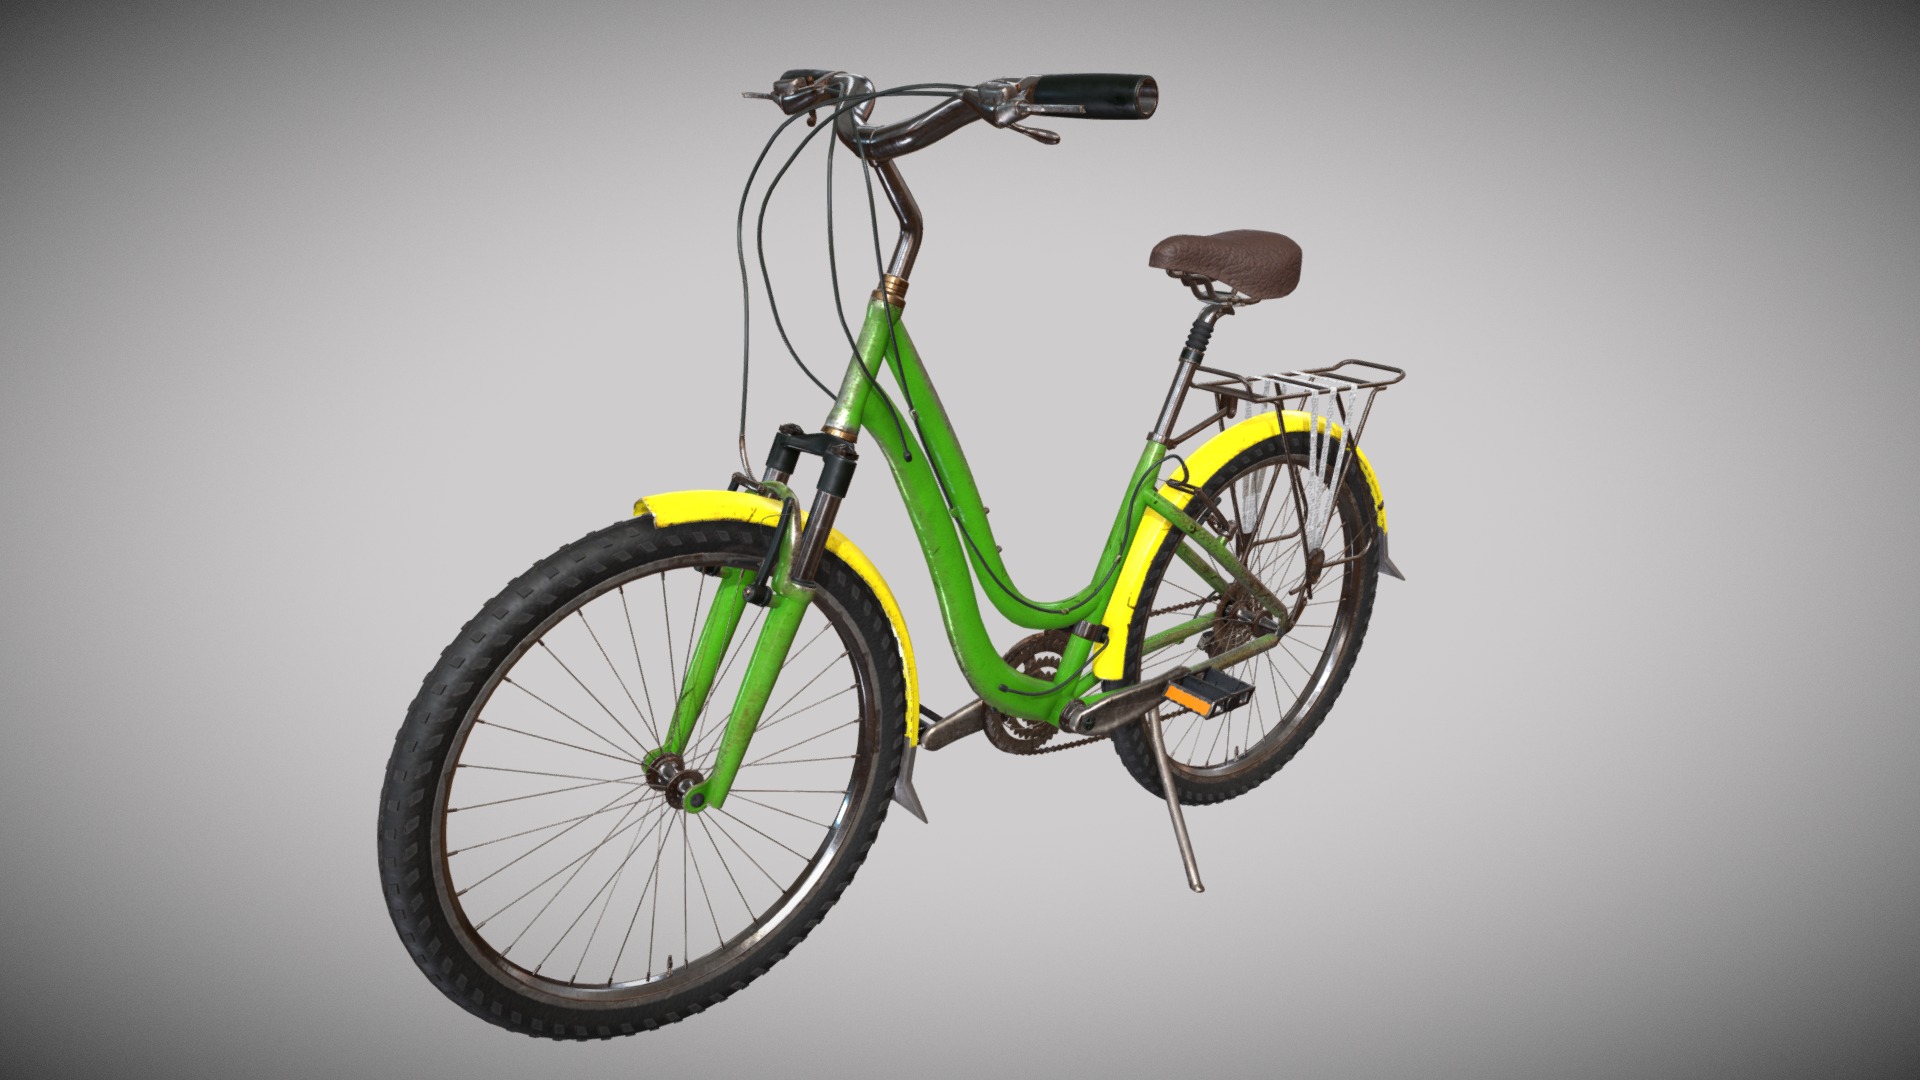 3D model Lady’s Bicycle - This is a 3D model of the Lady's Bicycle. The 3D model is about a green and yellow mountain bike.